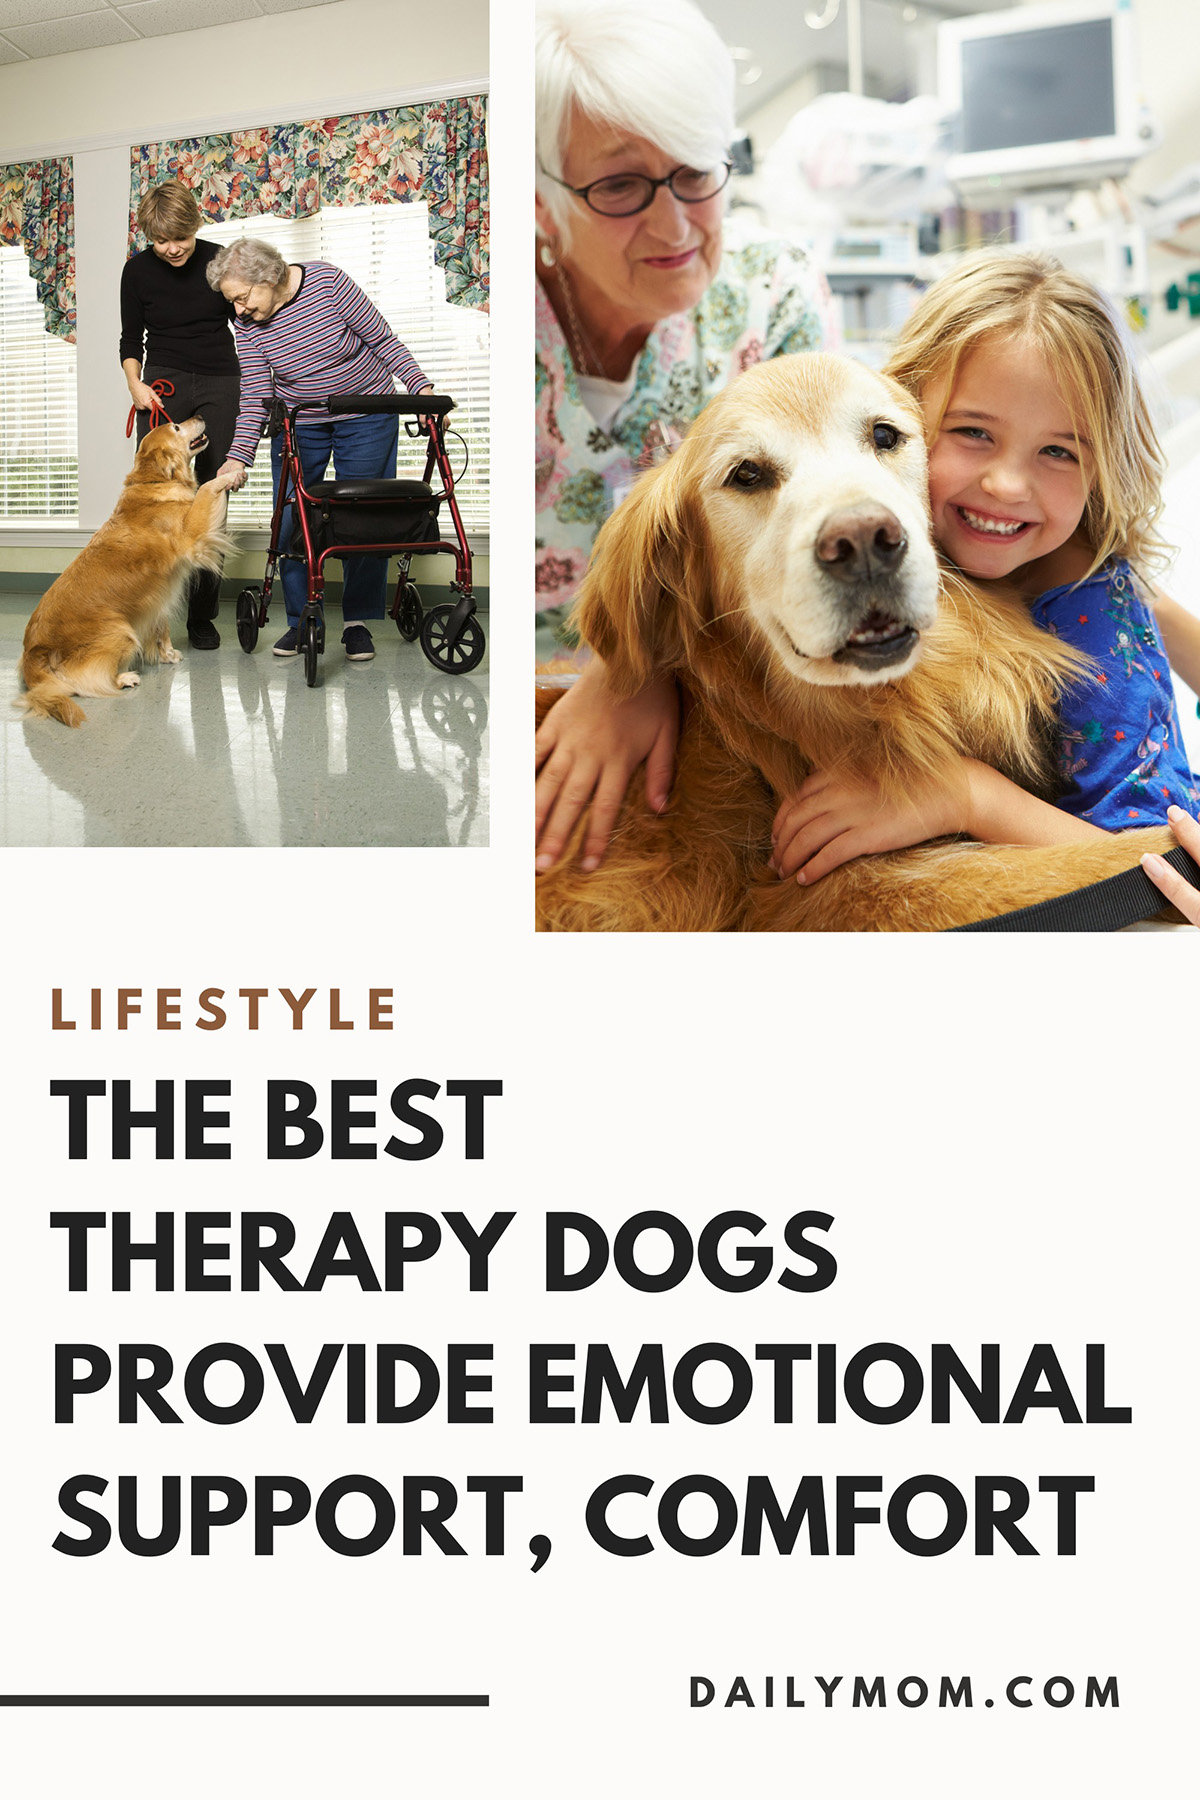 How The Best Therapy Dogs Provide Comfort And Support To Their Owners